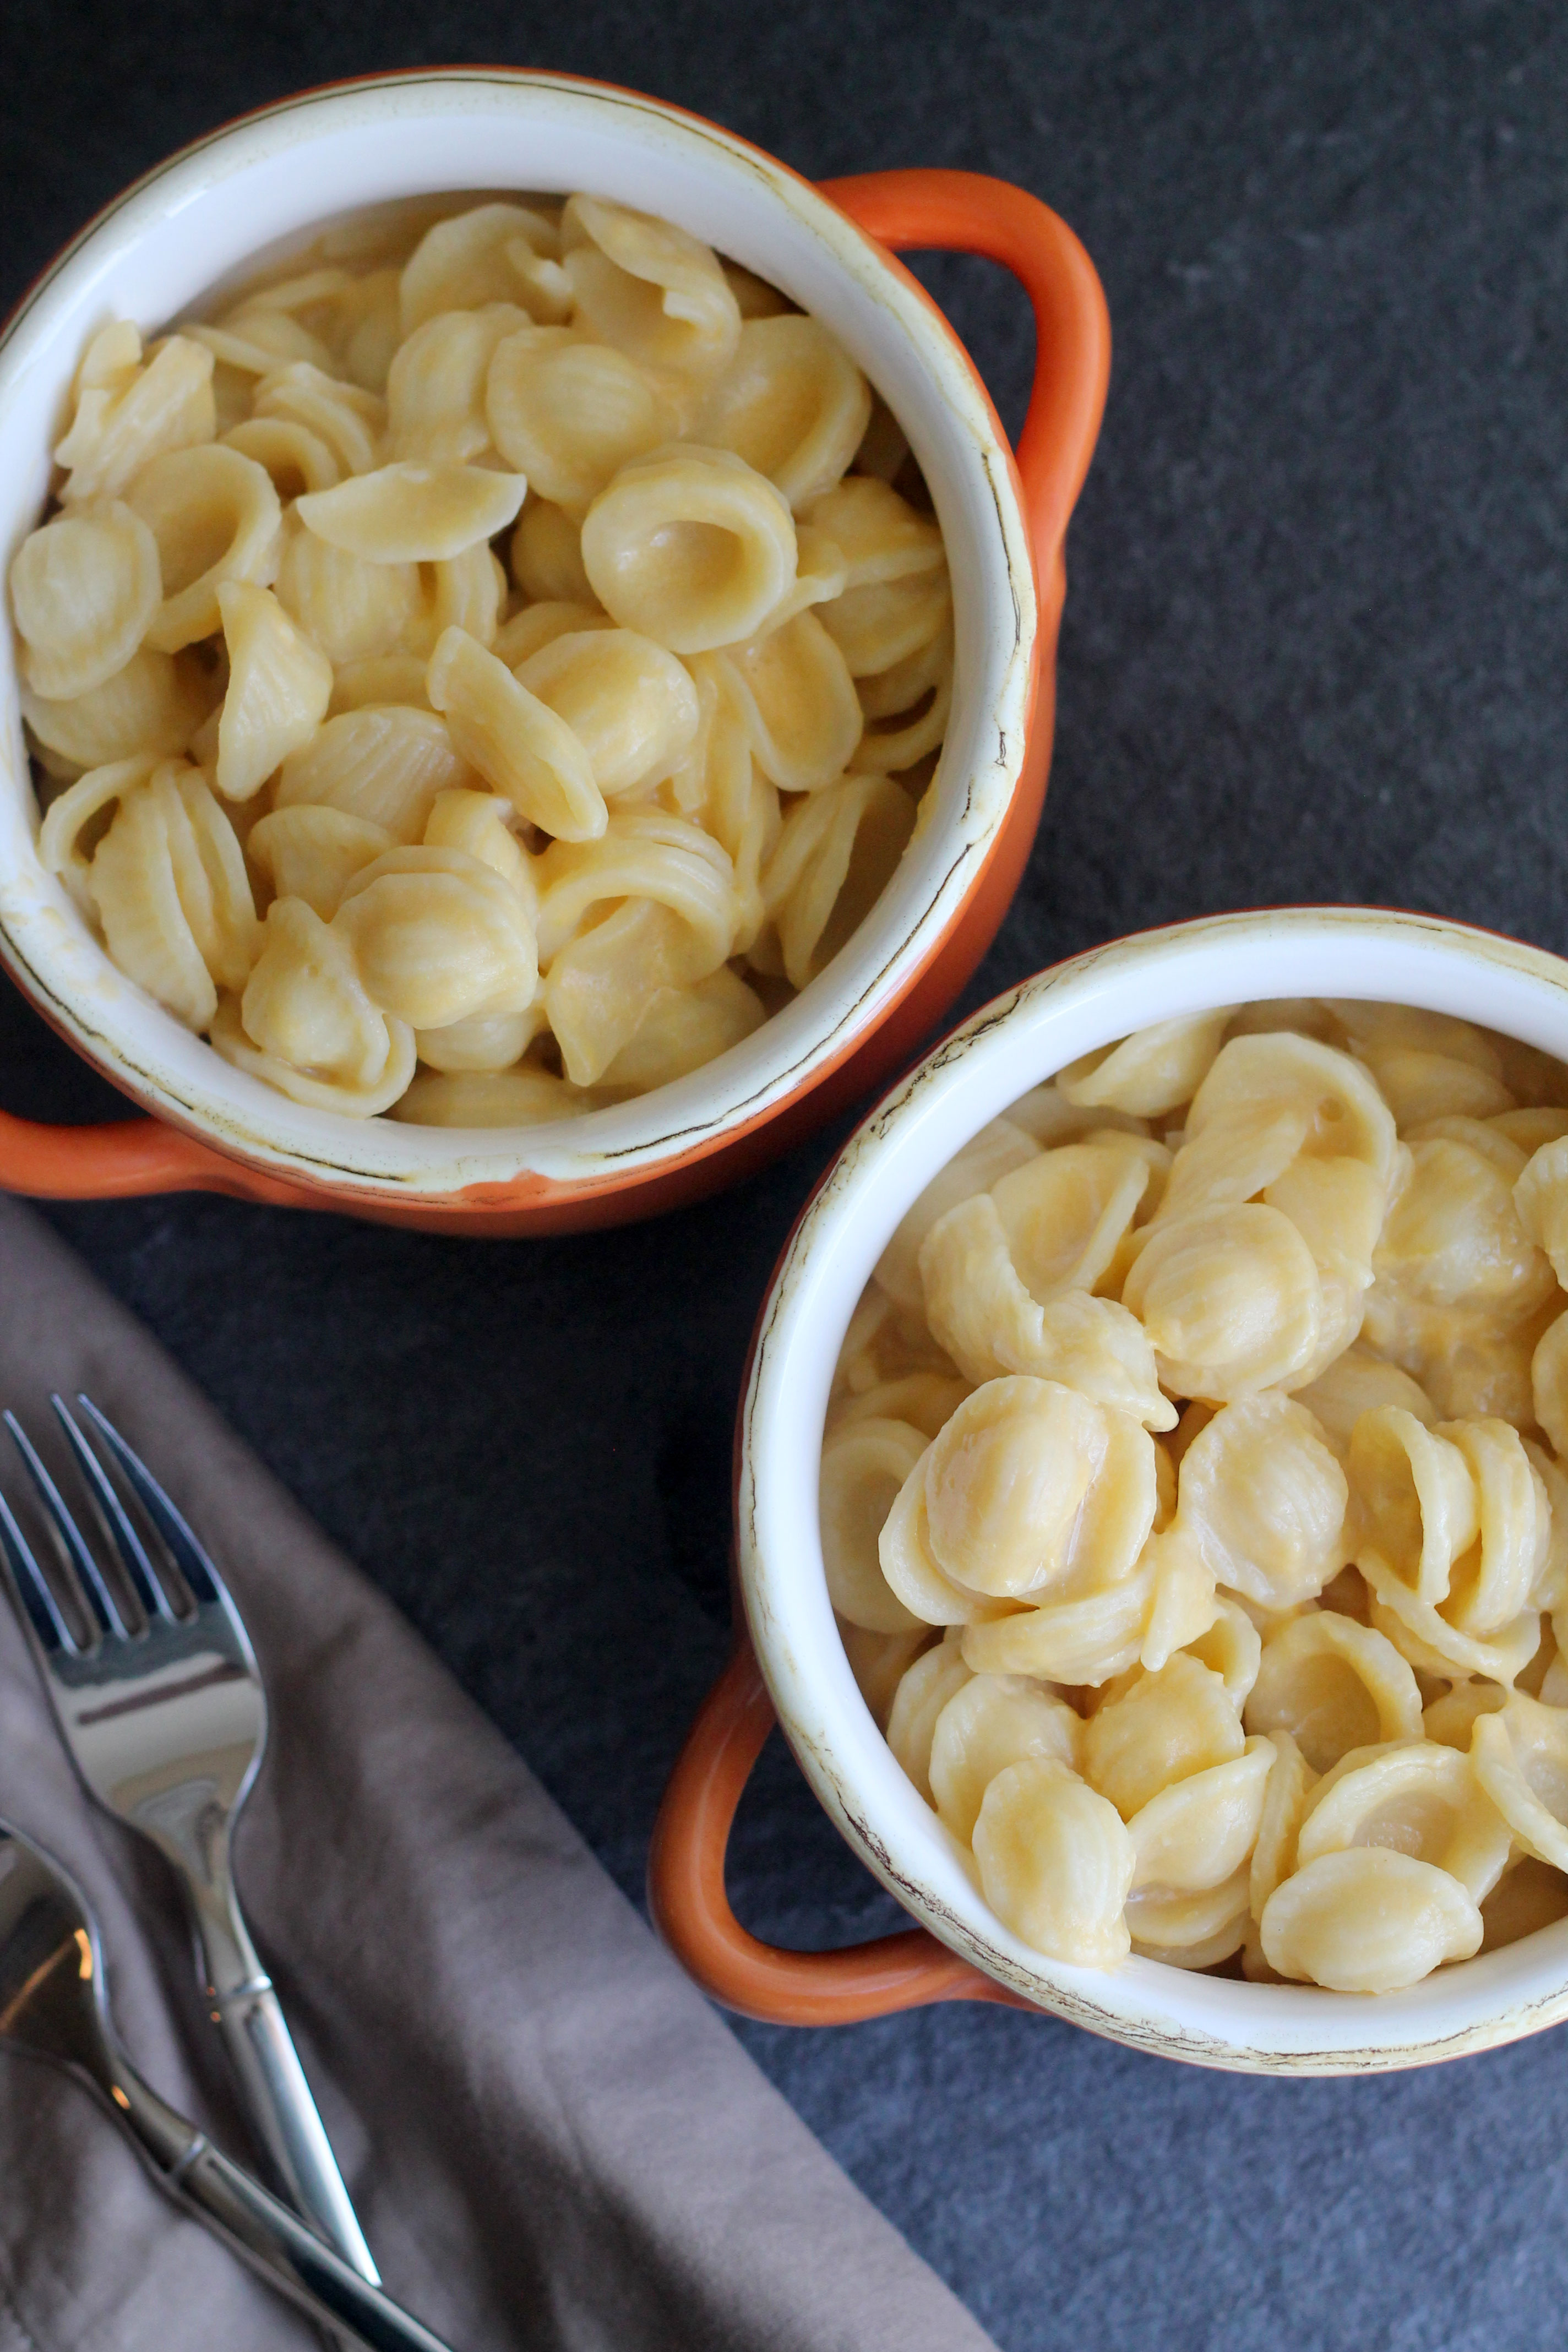 This Butternut Squash Mac and Cheese is Cheesy, Satisfying and Full of Flavor